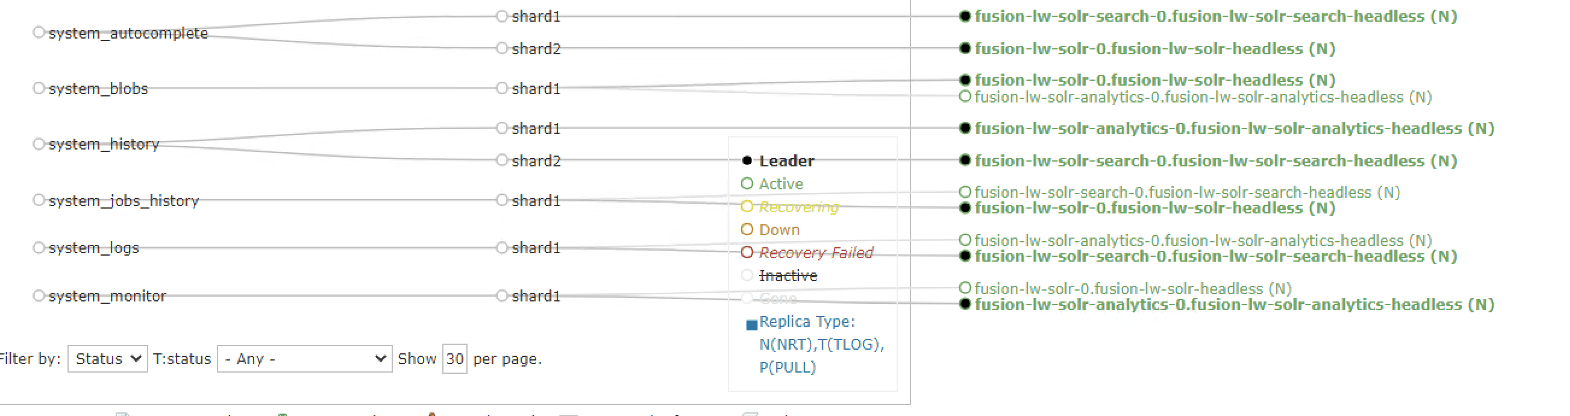 Update Solr collections to land on specific nodes